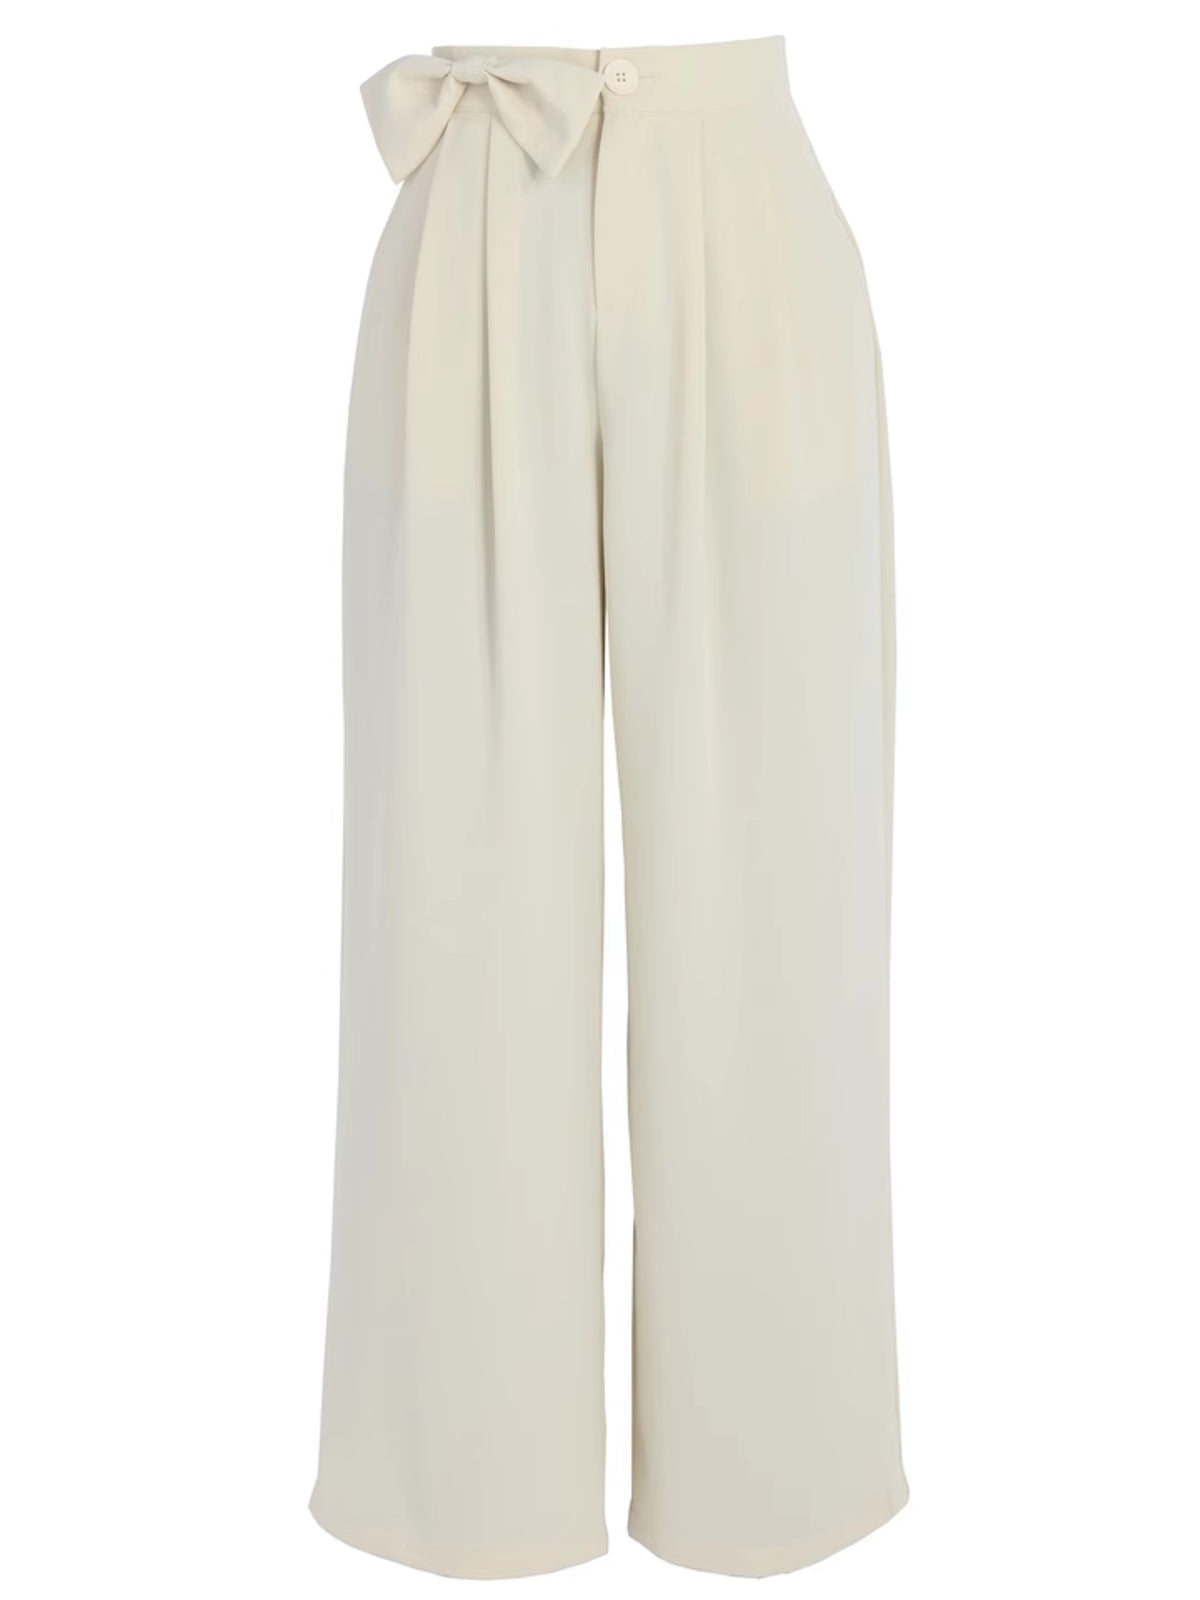 Cool Chiffon Wide Leg Drape Pants in Solid Color-ntbhshop